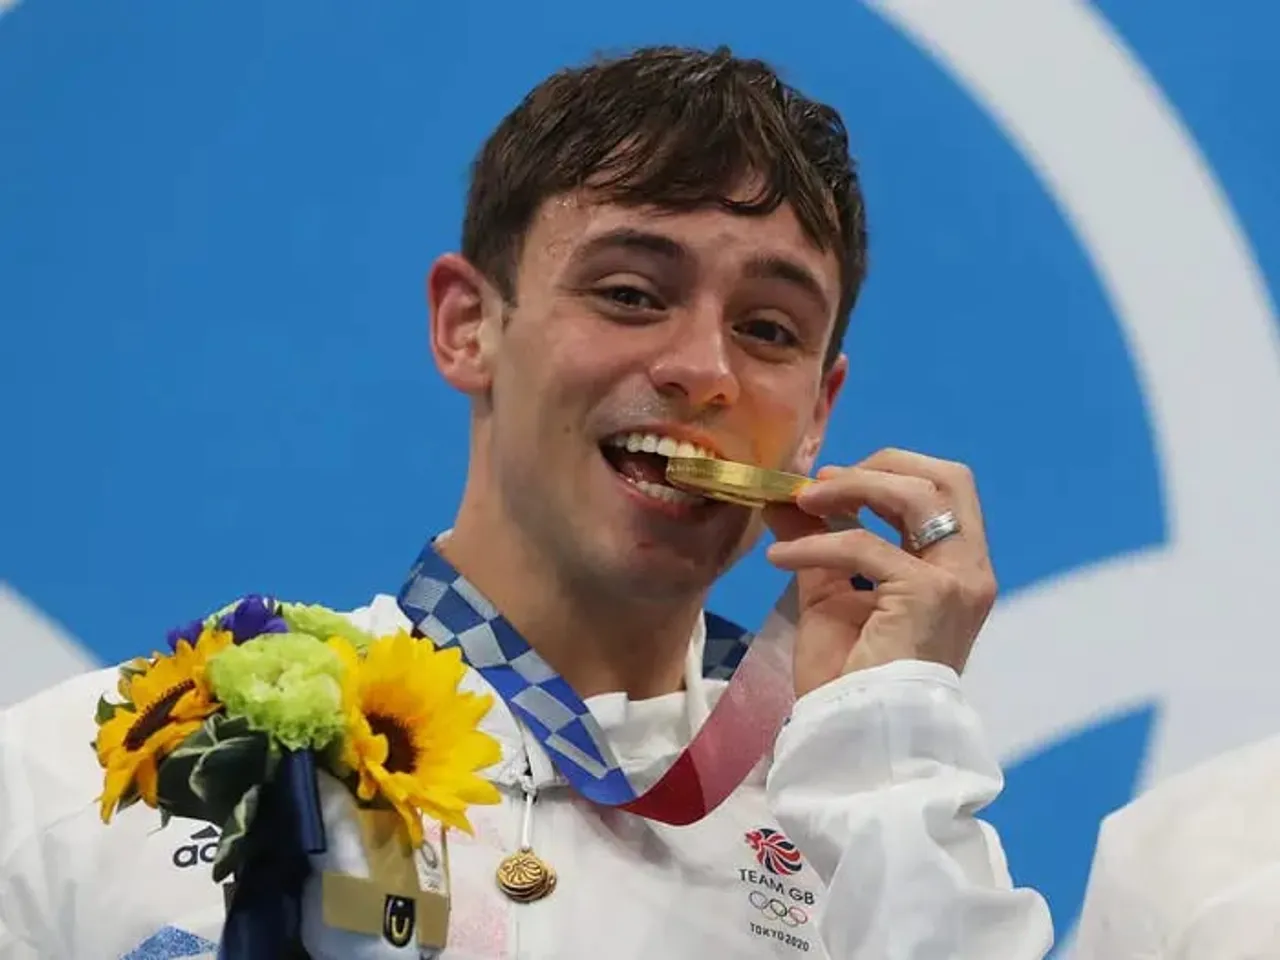 Tom Daley, the proud gay Olympian from Great Britian has won the 10m synchronized diving gold medal with Matty Lee - SportzPoint